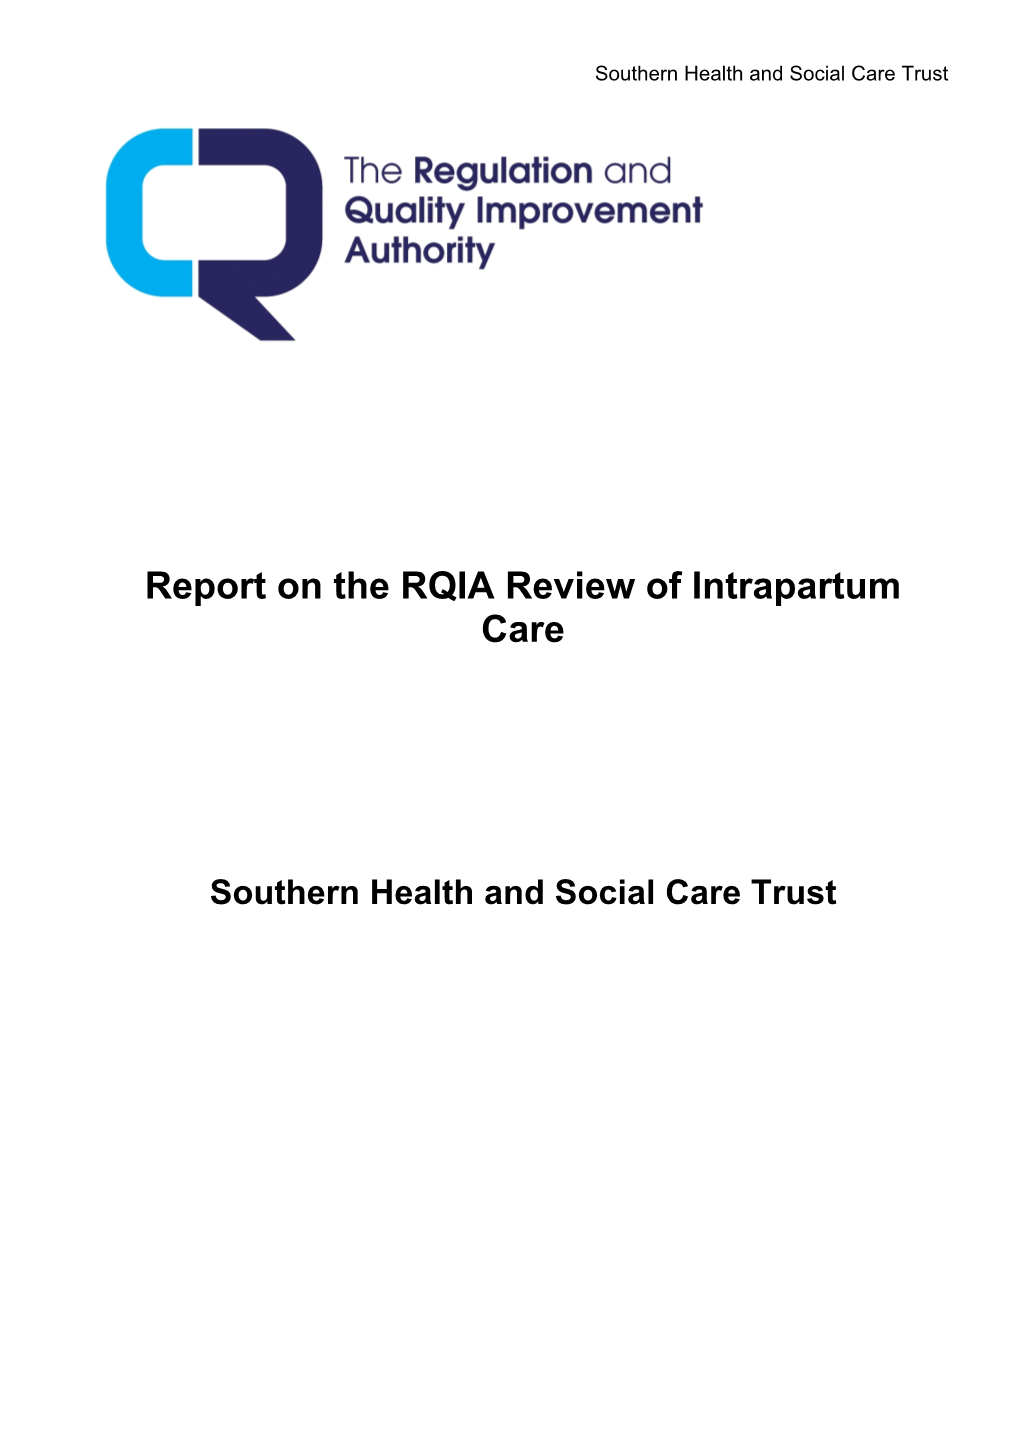 Review of Intrapartum Care (Southern HSC Trust)